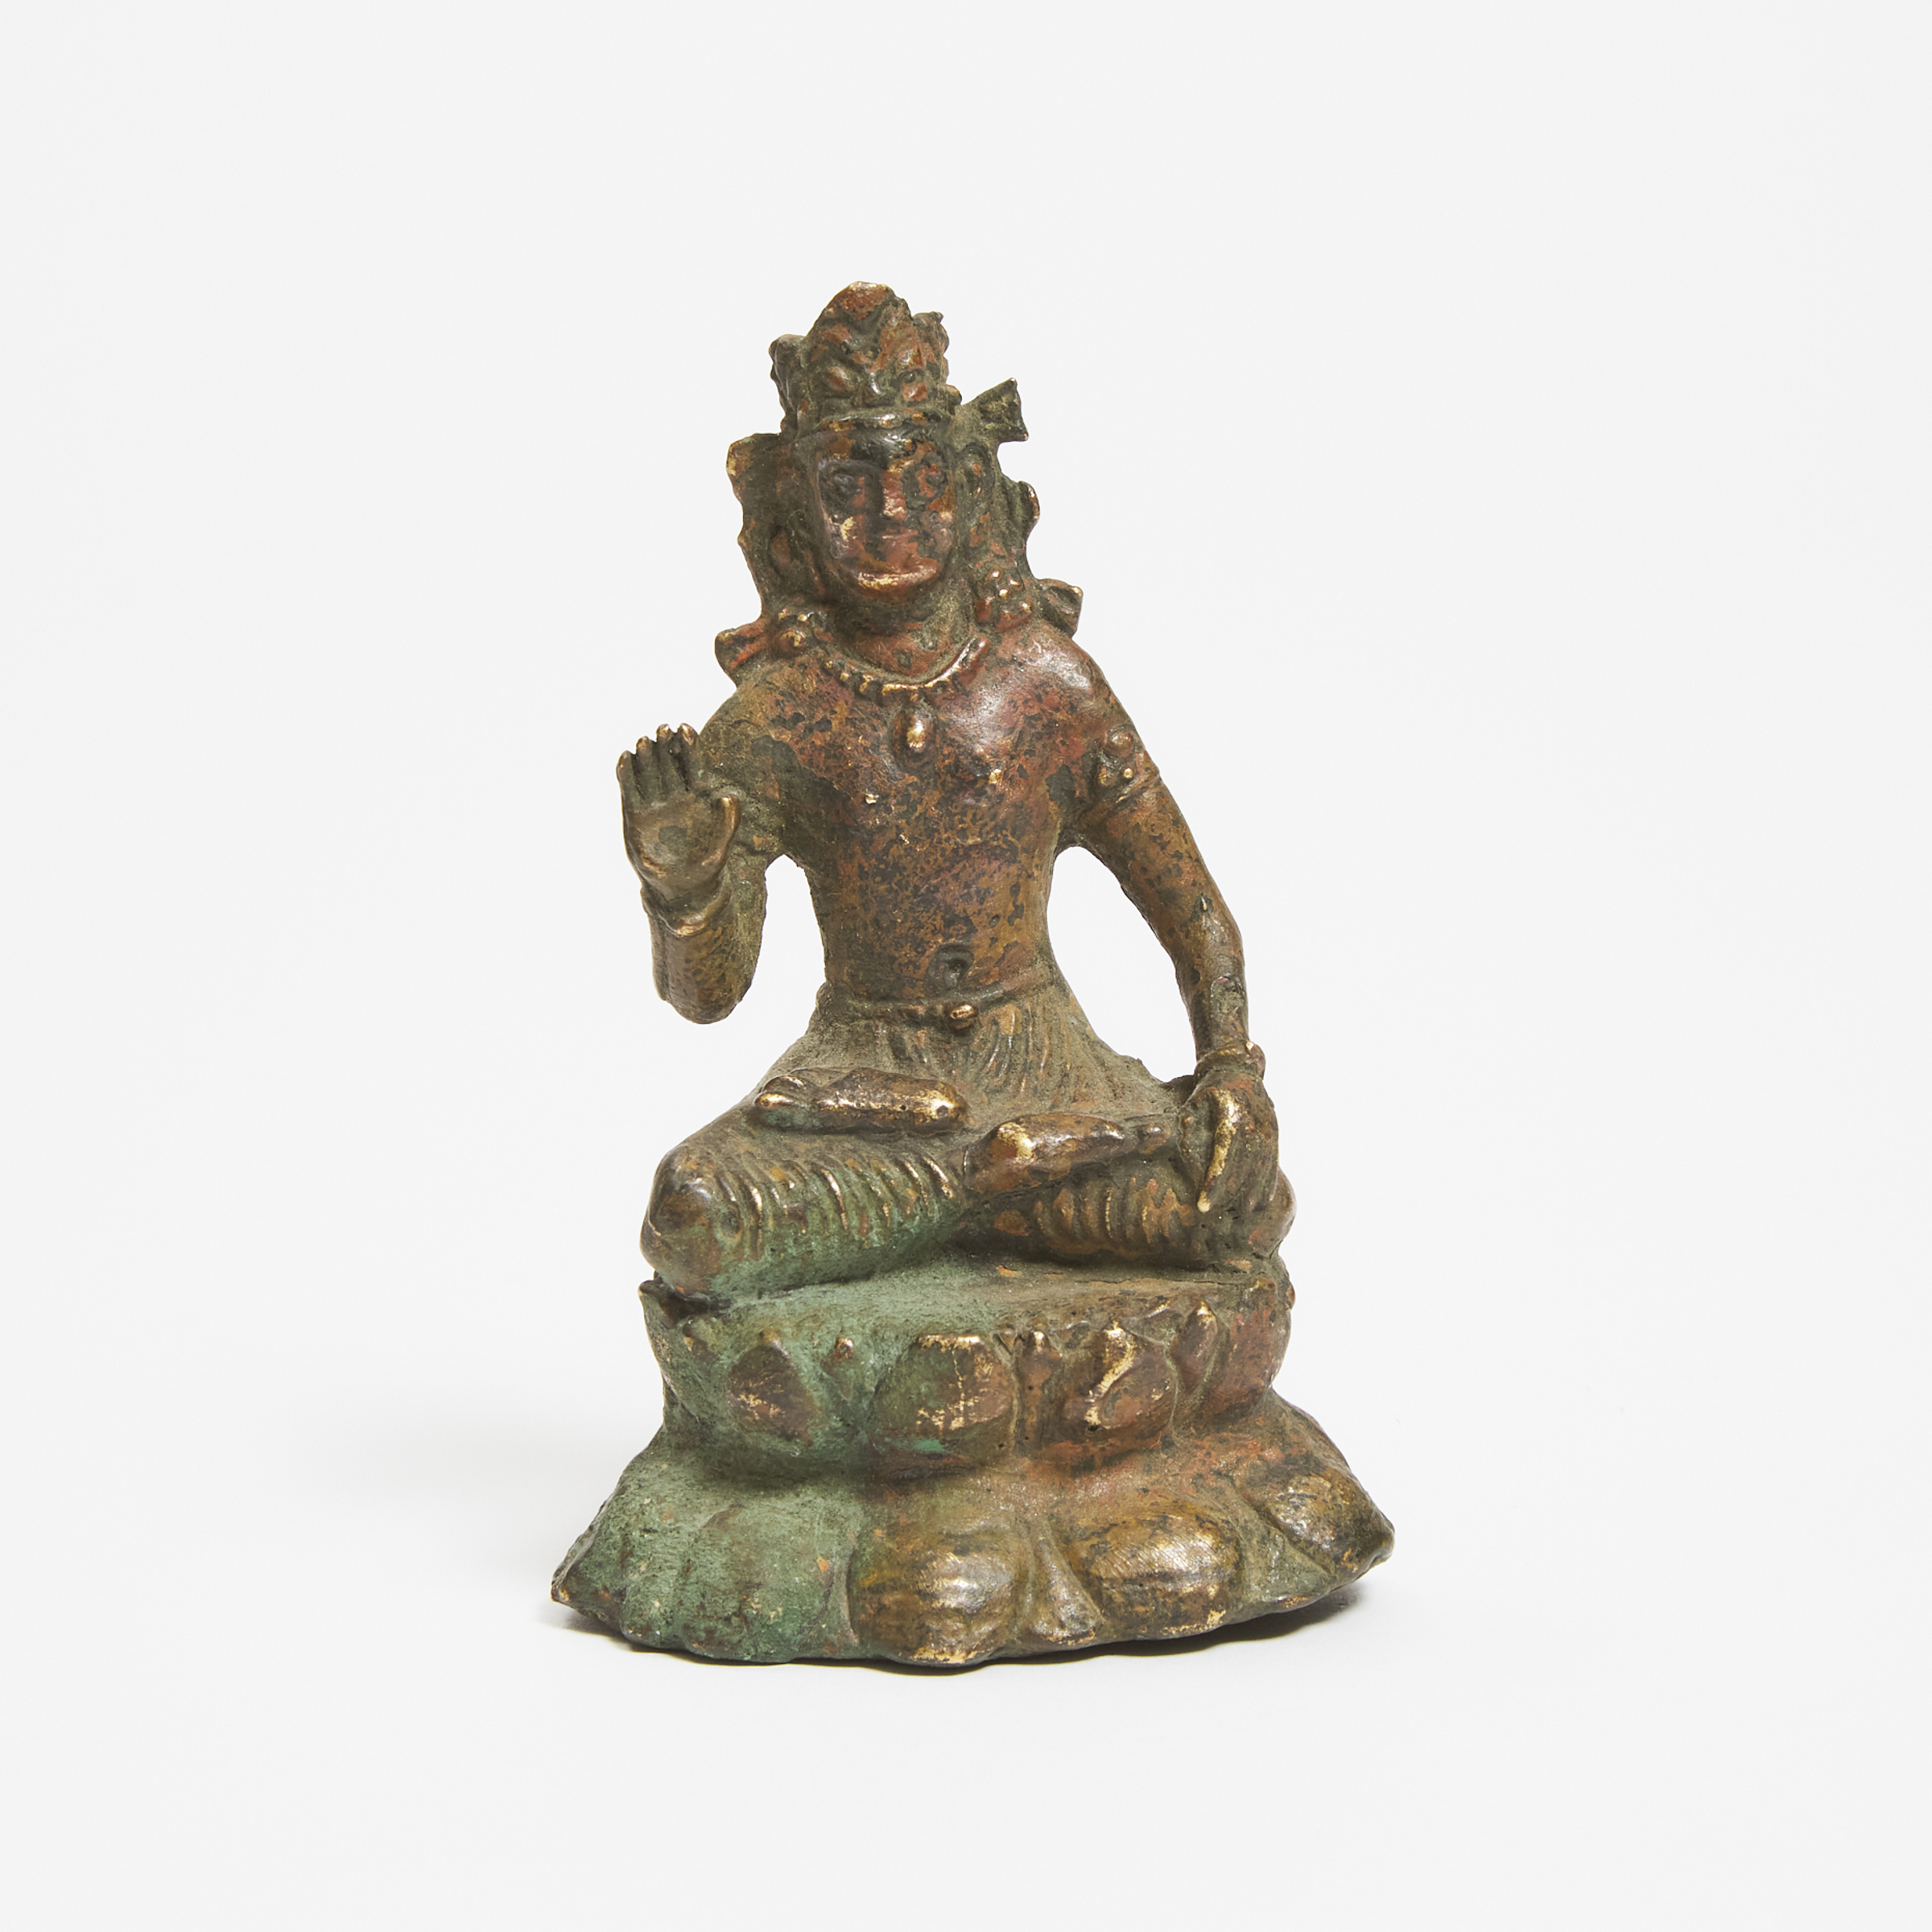 A Bronze Figure of Buddha, Swat Valley, 9th Century or Later